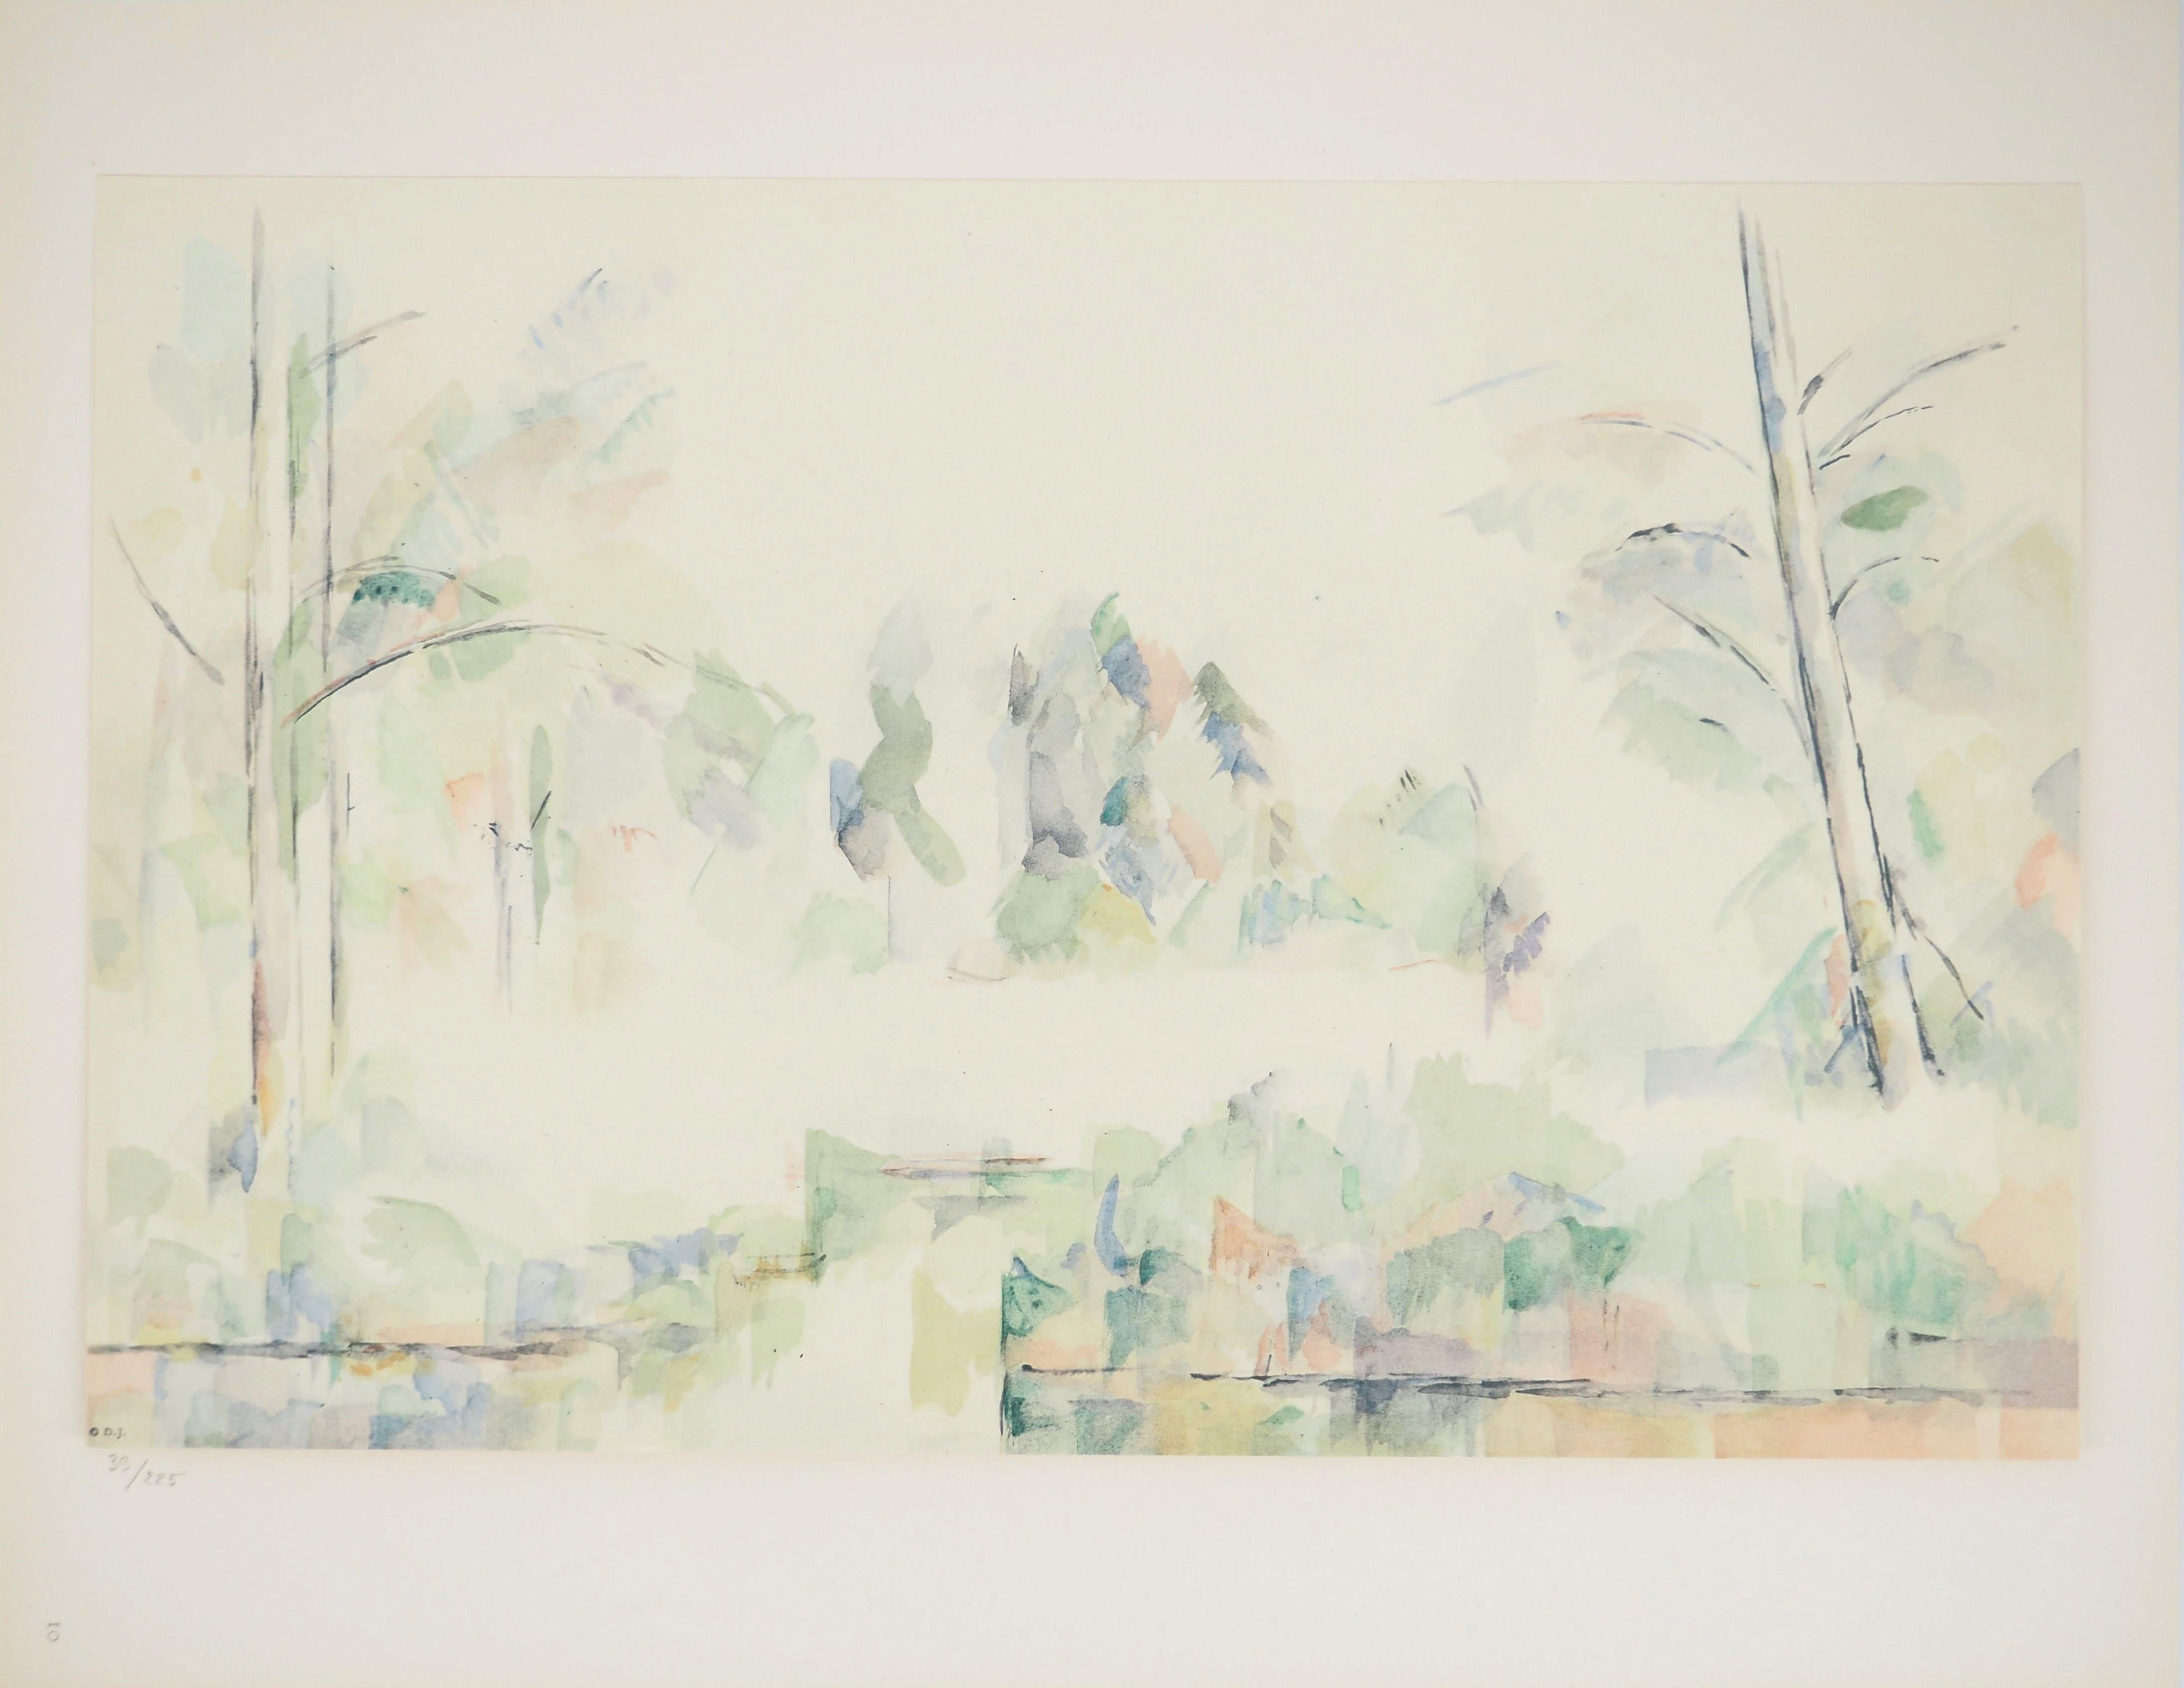 View from de lake - Lithograph, 1971